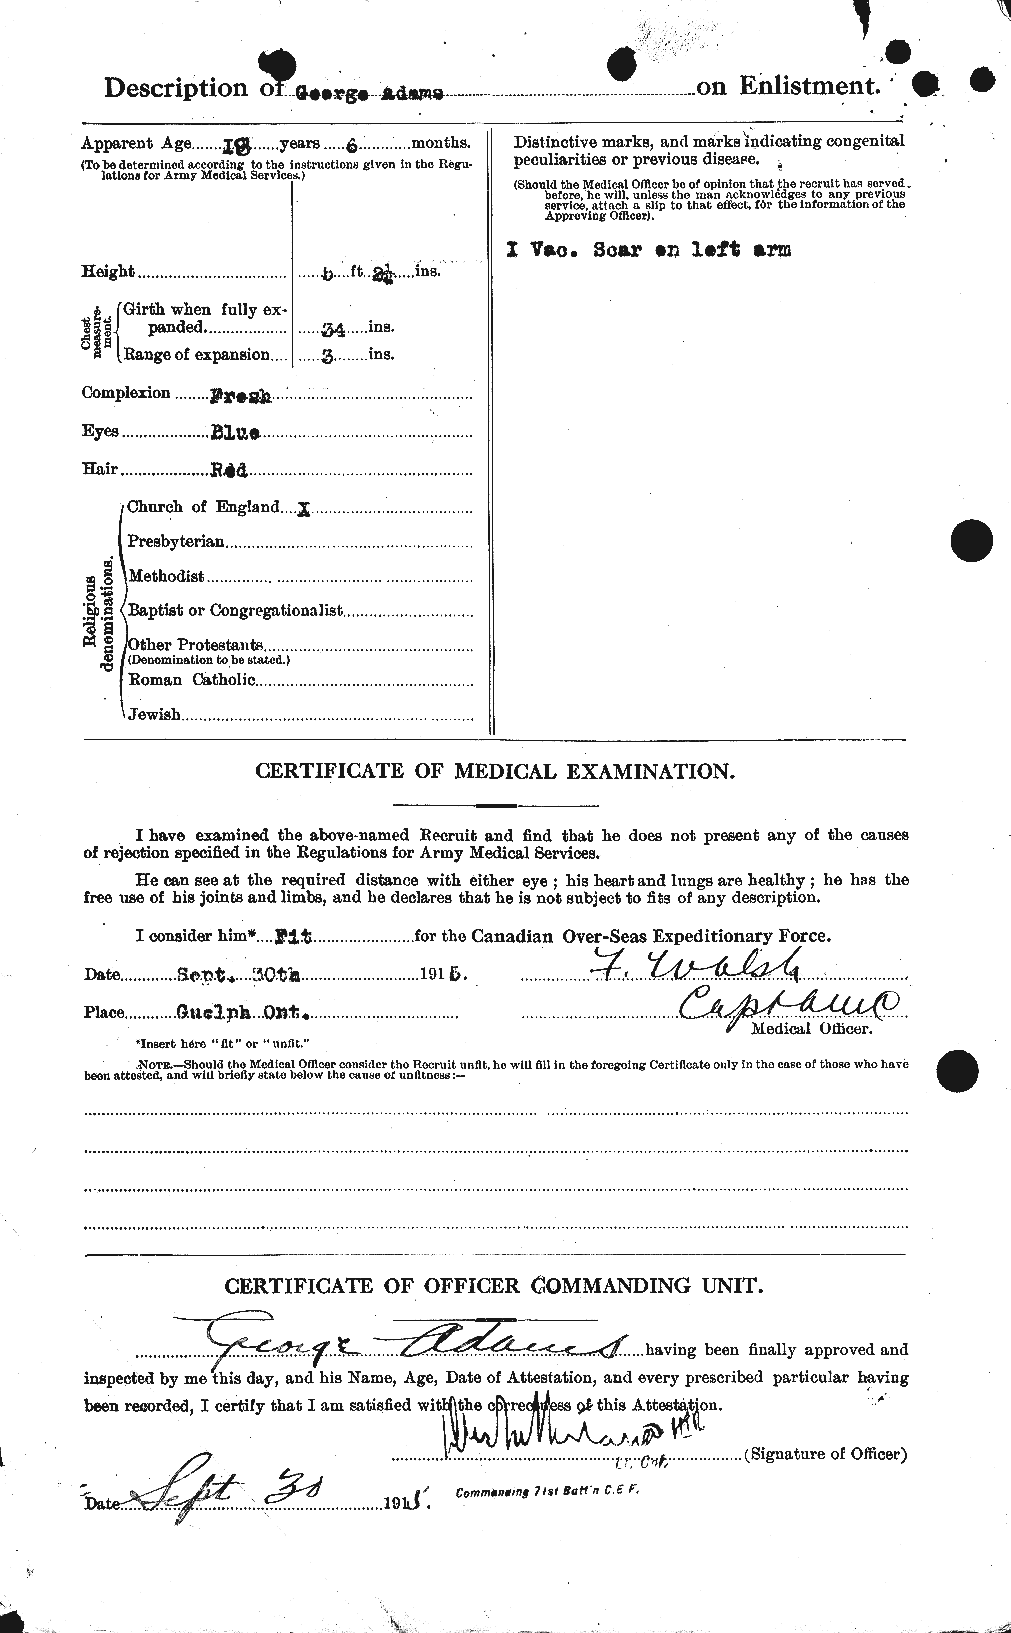 Personnel Records of the First World War - CEF 202557b